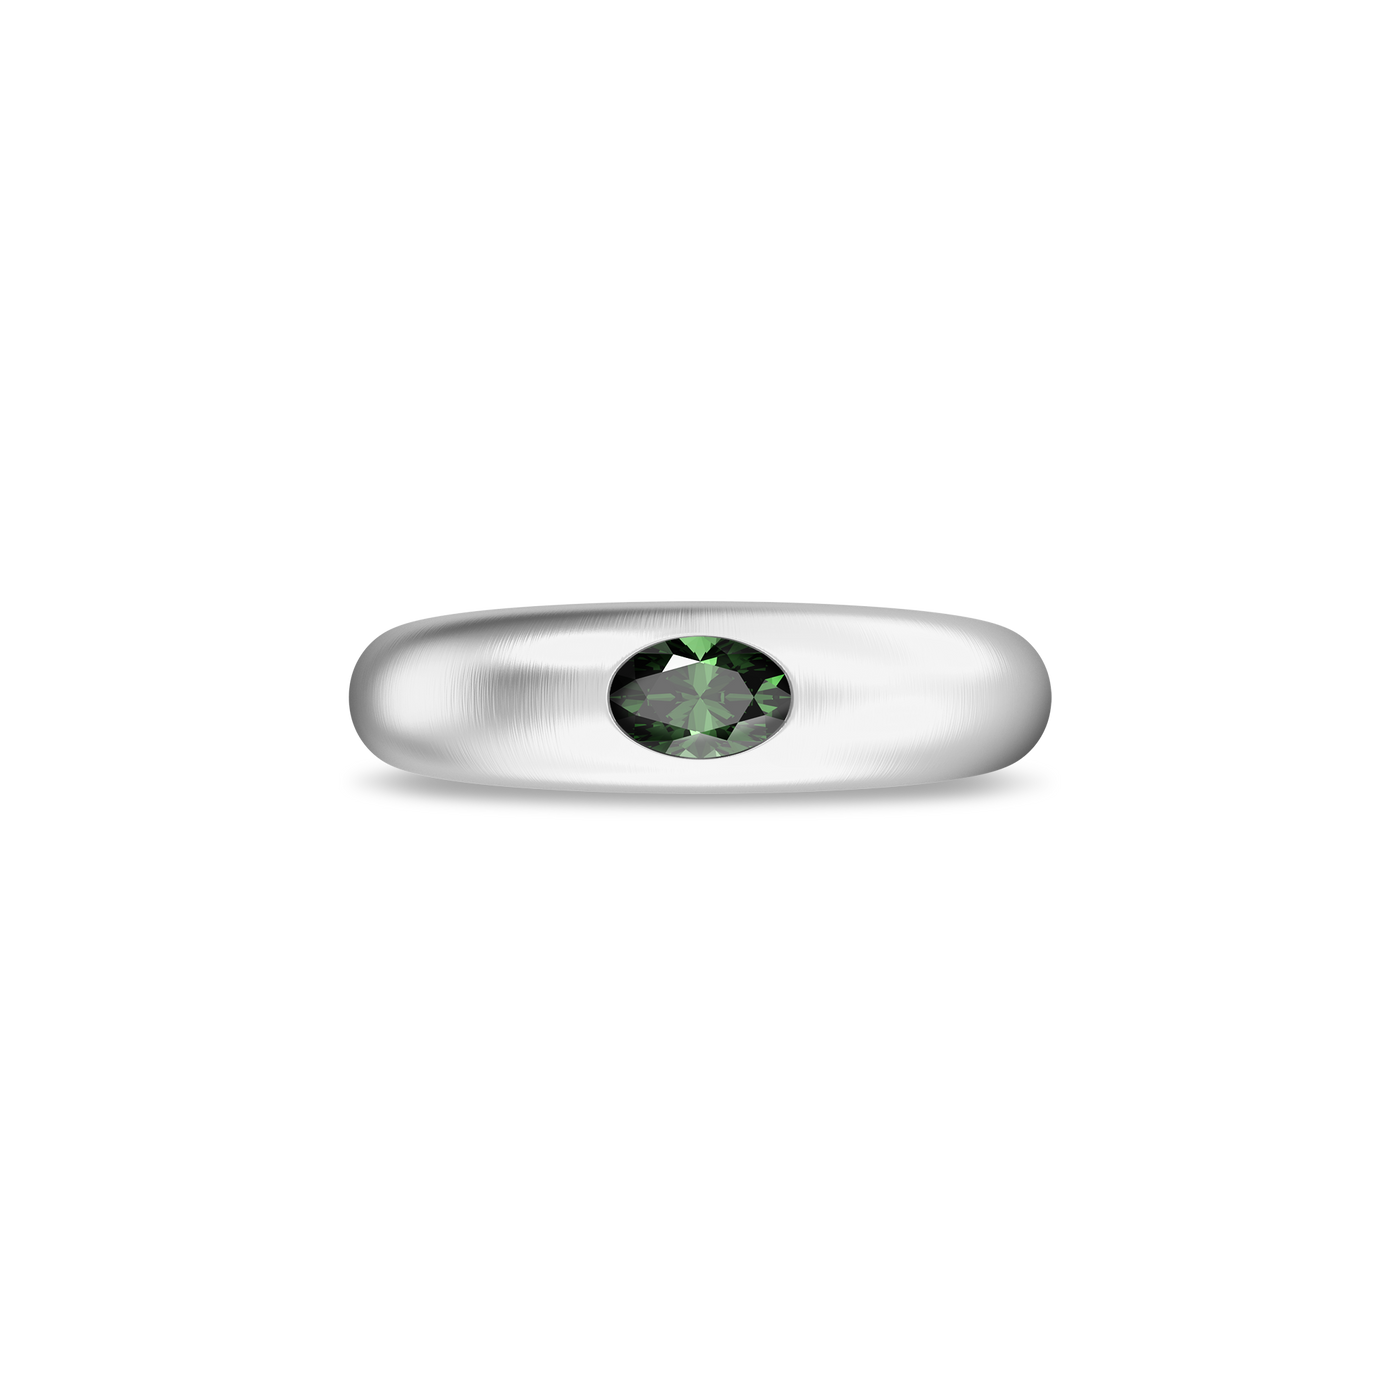 Solitaire Oval Cut Gemstone Promise Ring